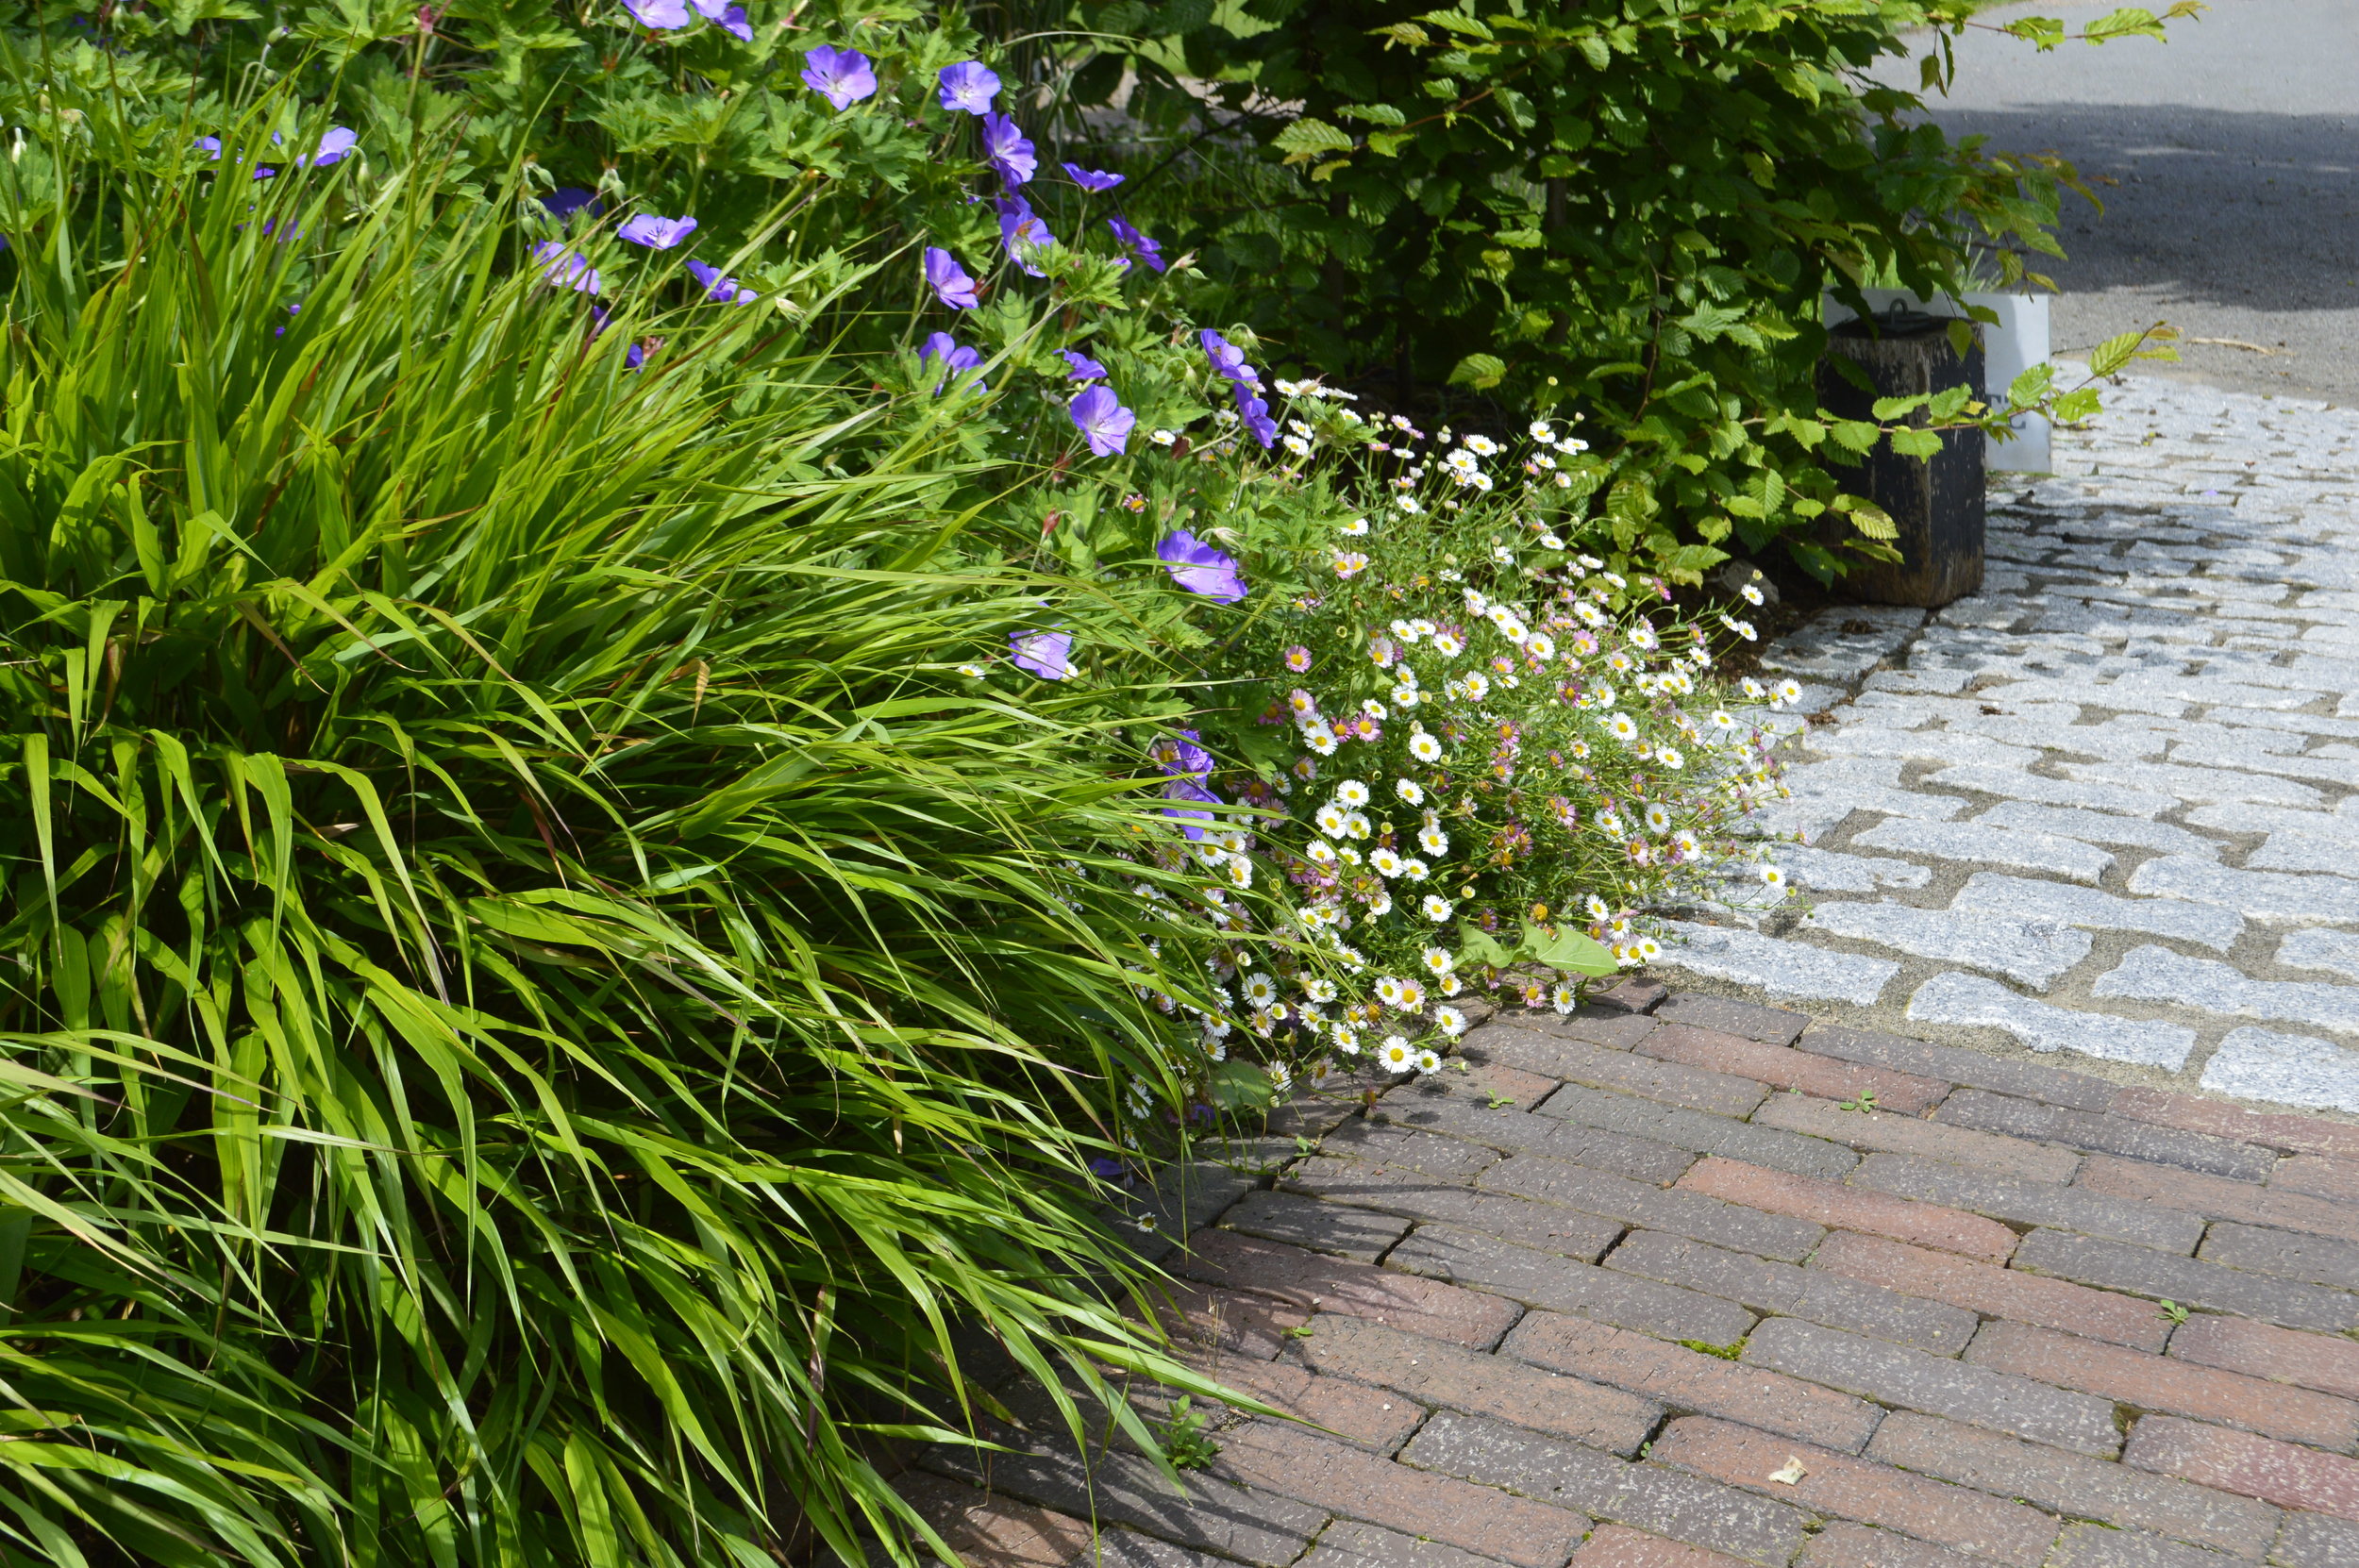 Edging - using plants that spill over landscape edging to blur lines and soften the space